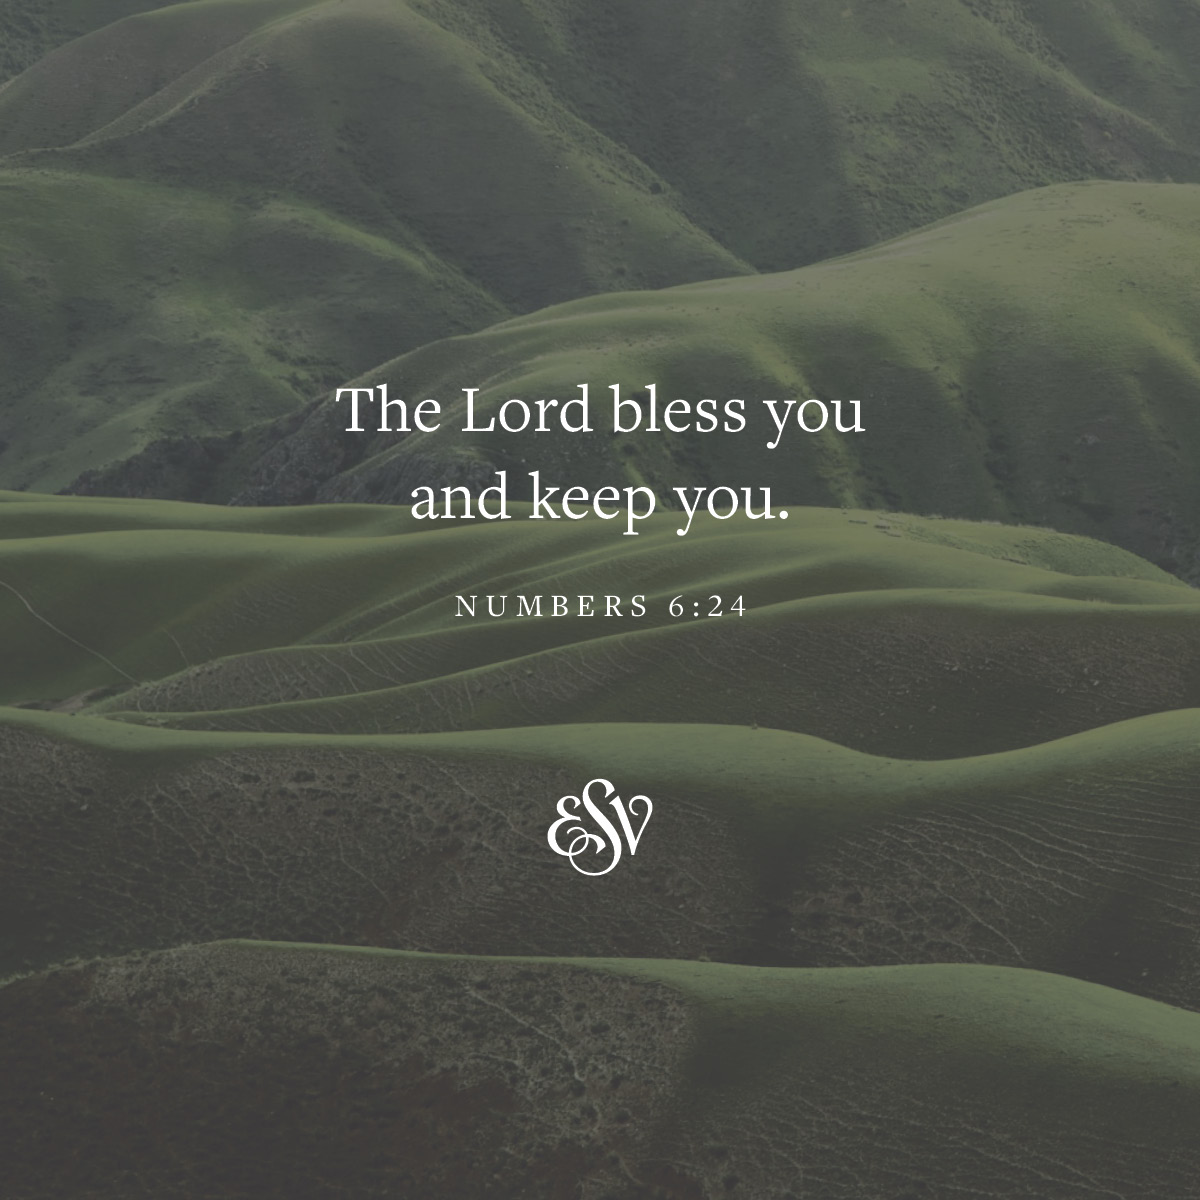 'The Lord bless you and keep you. NUMBERS 6:24 Sp'